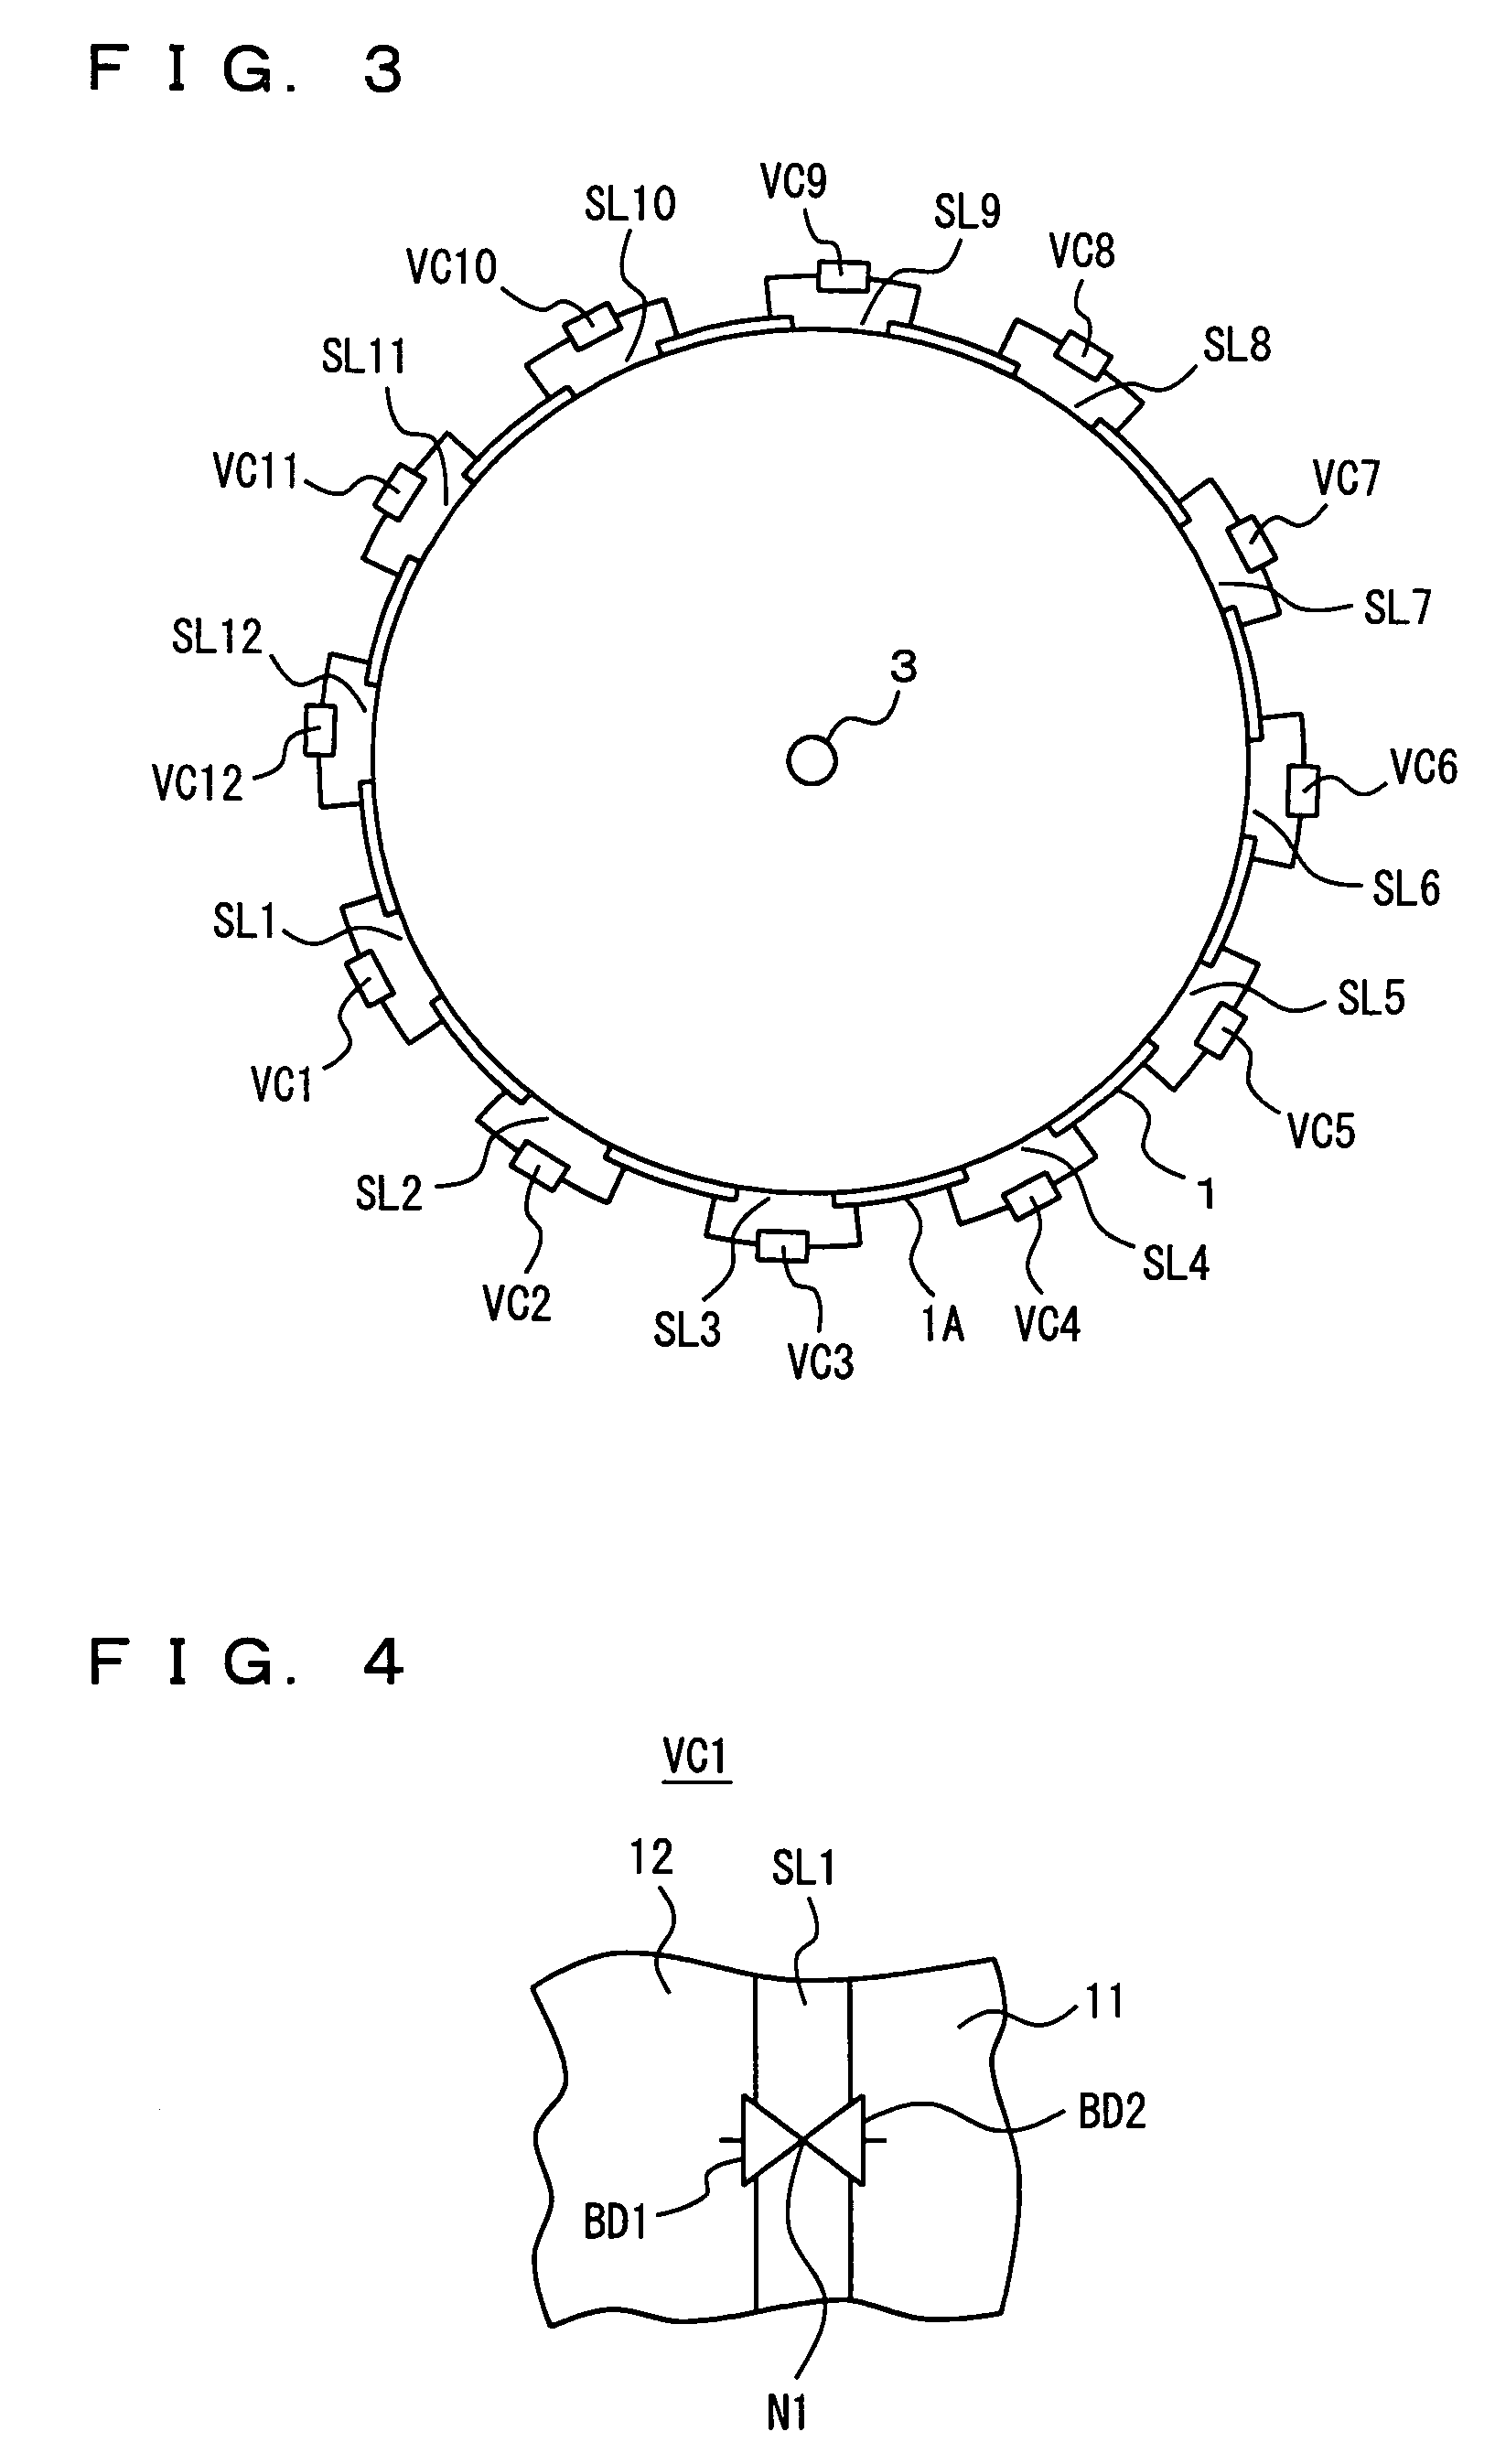 Array antenna capable of controlling antenna characteristic